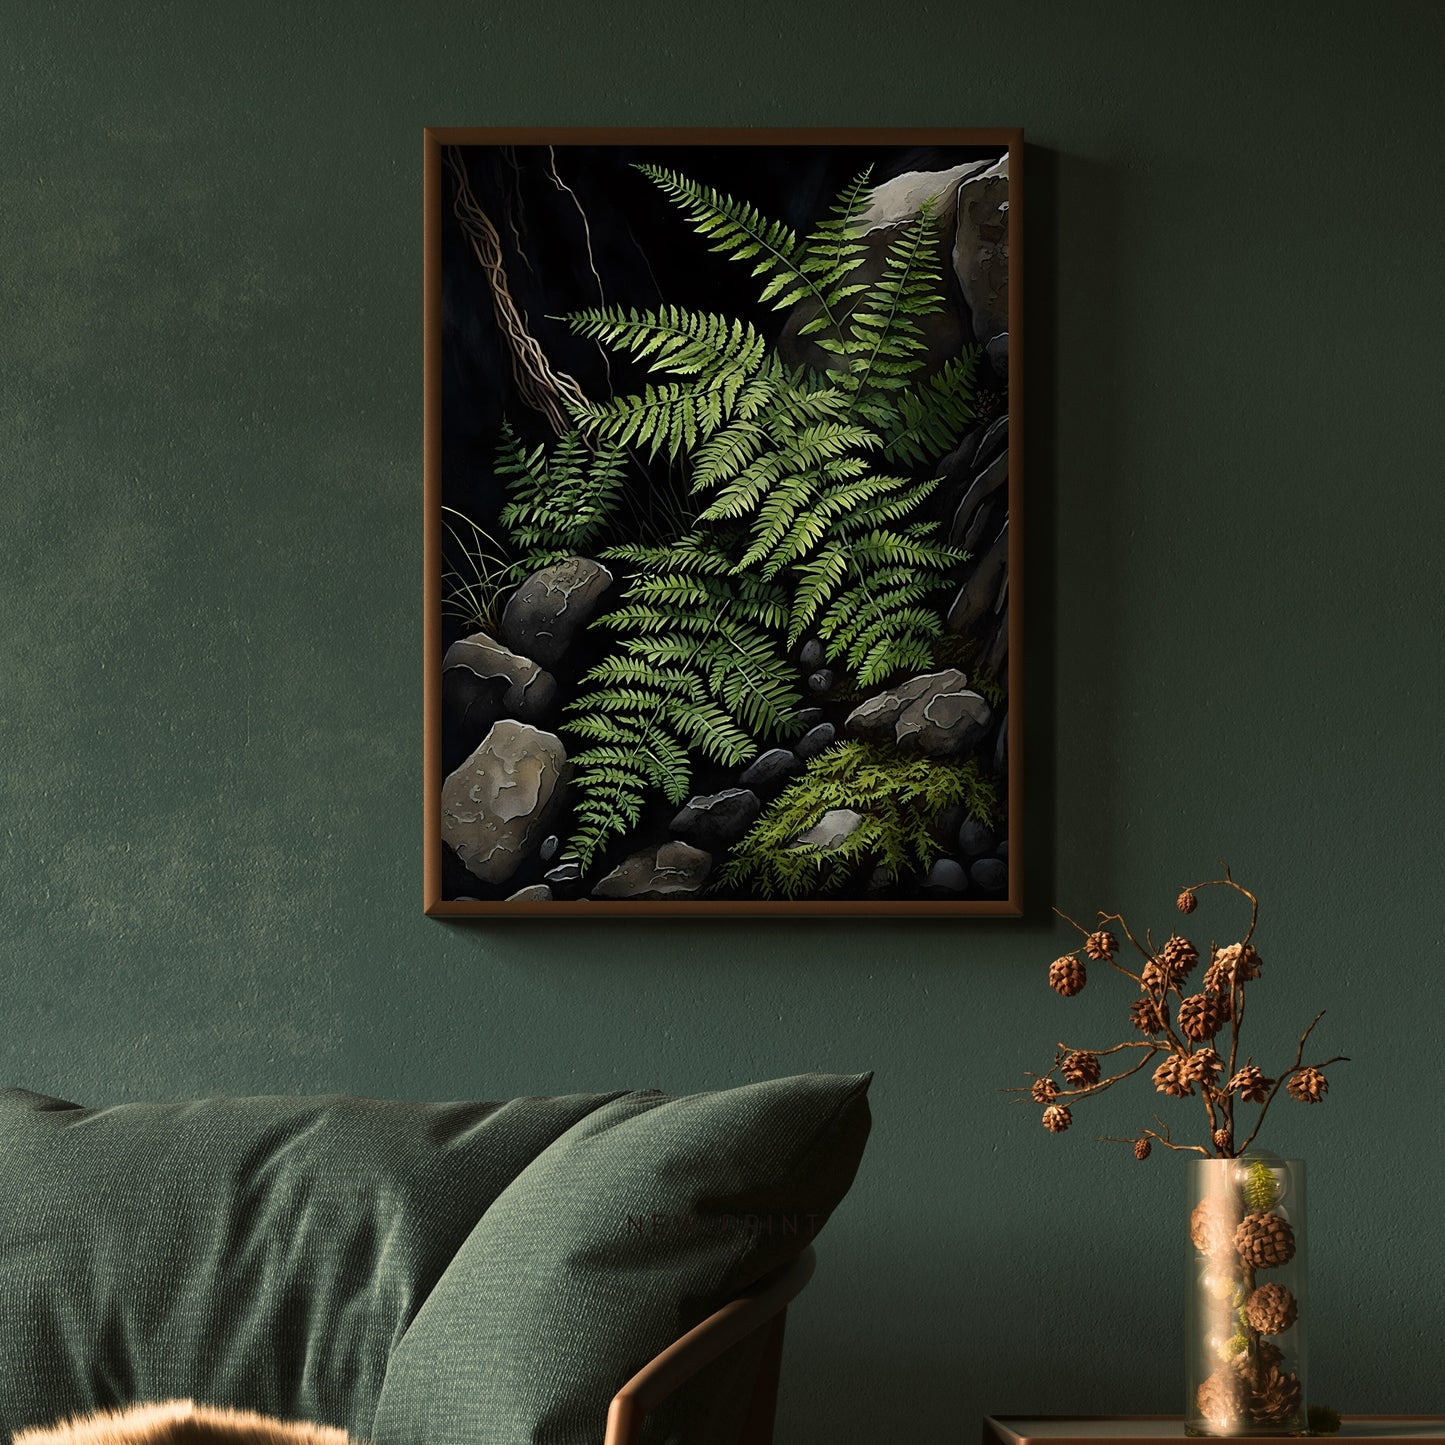 Deep Forest Fern Gothic Wall Art, Dark Cottagecore Print, Vintage Botanical Decor, Green Aesthetic Wall Art, Goblincore Oil Painting, Dark Moody Paper Poster Prints